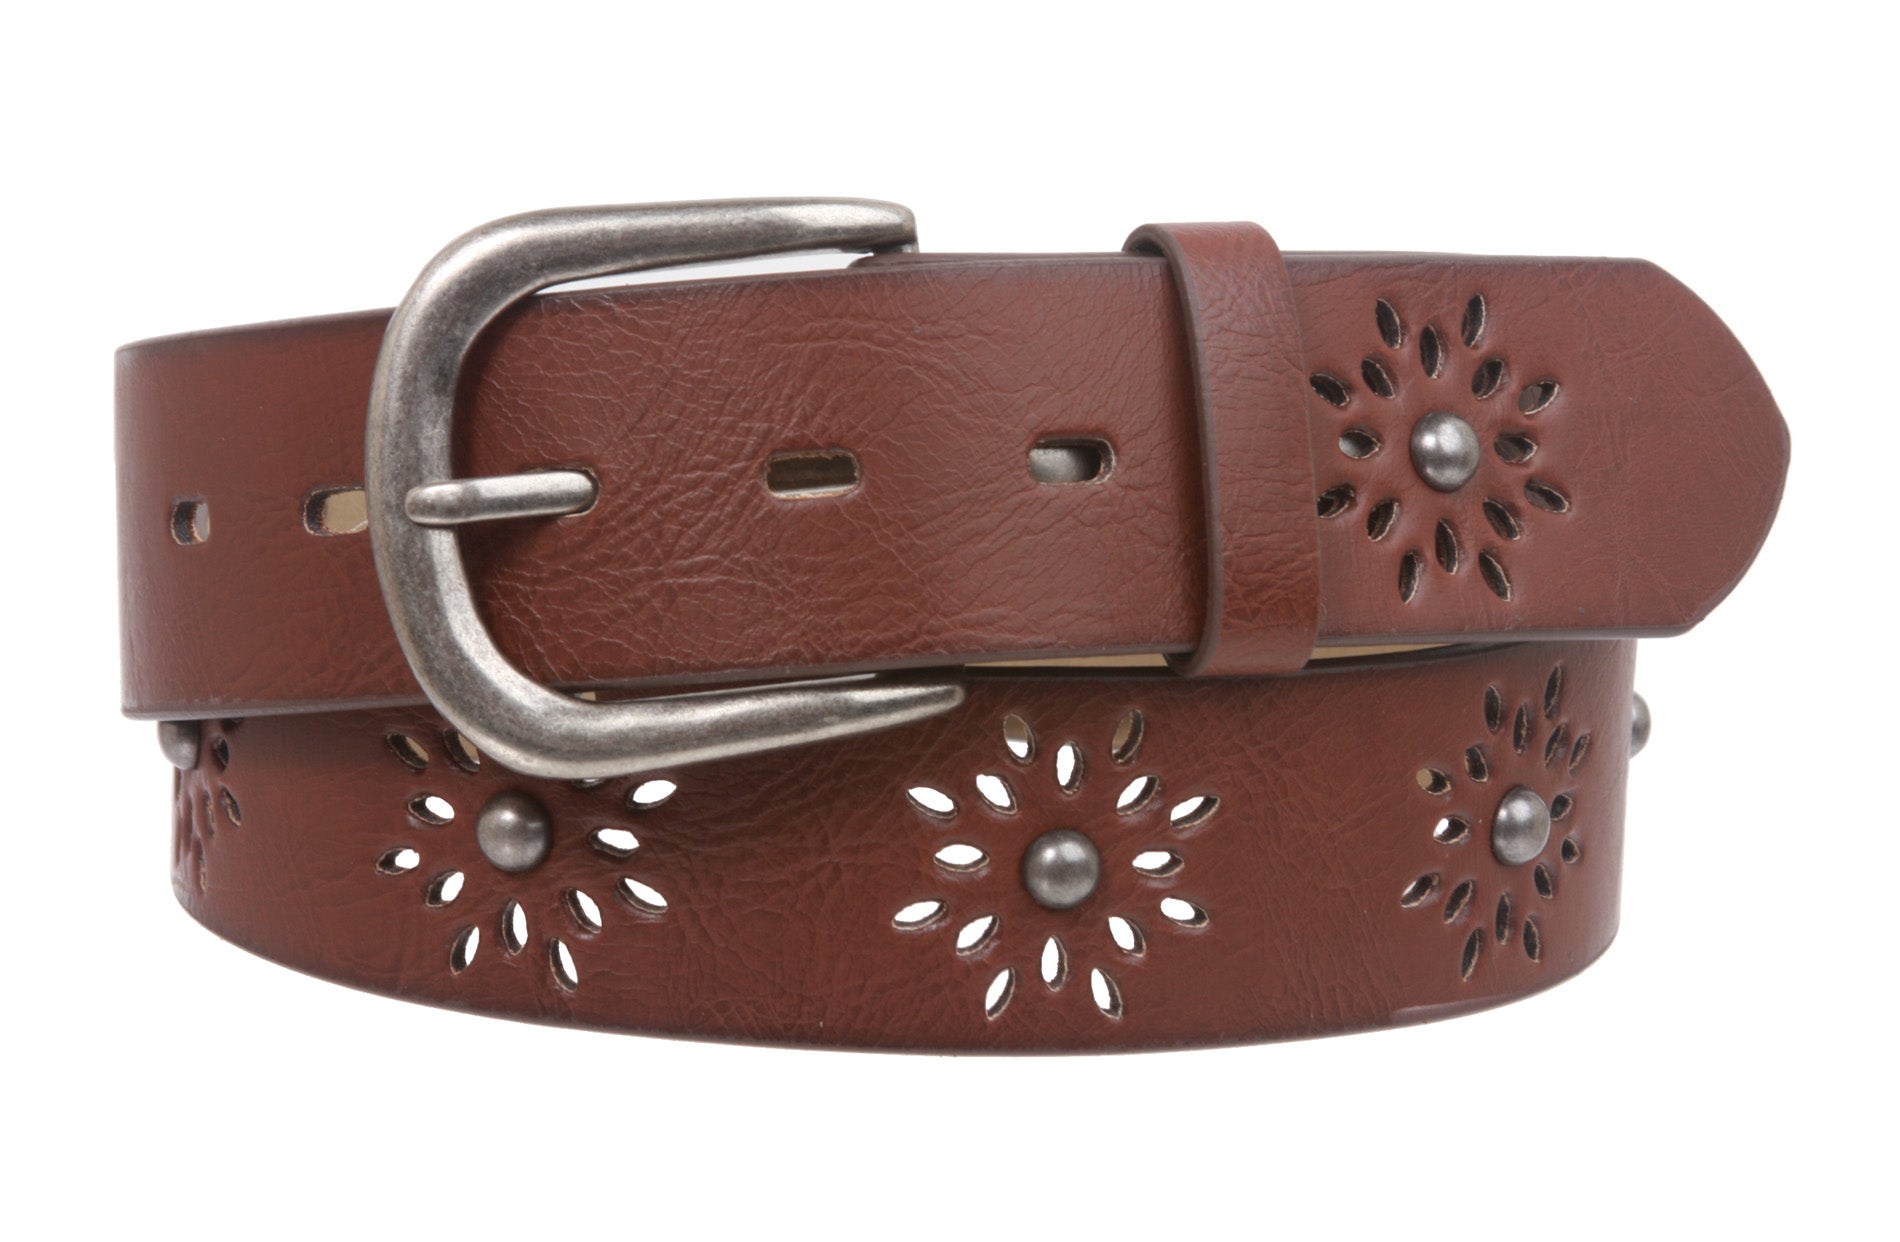 Women's Snap on Perforated Laser Cut Studded Leather Belt